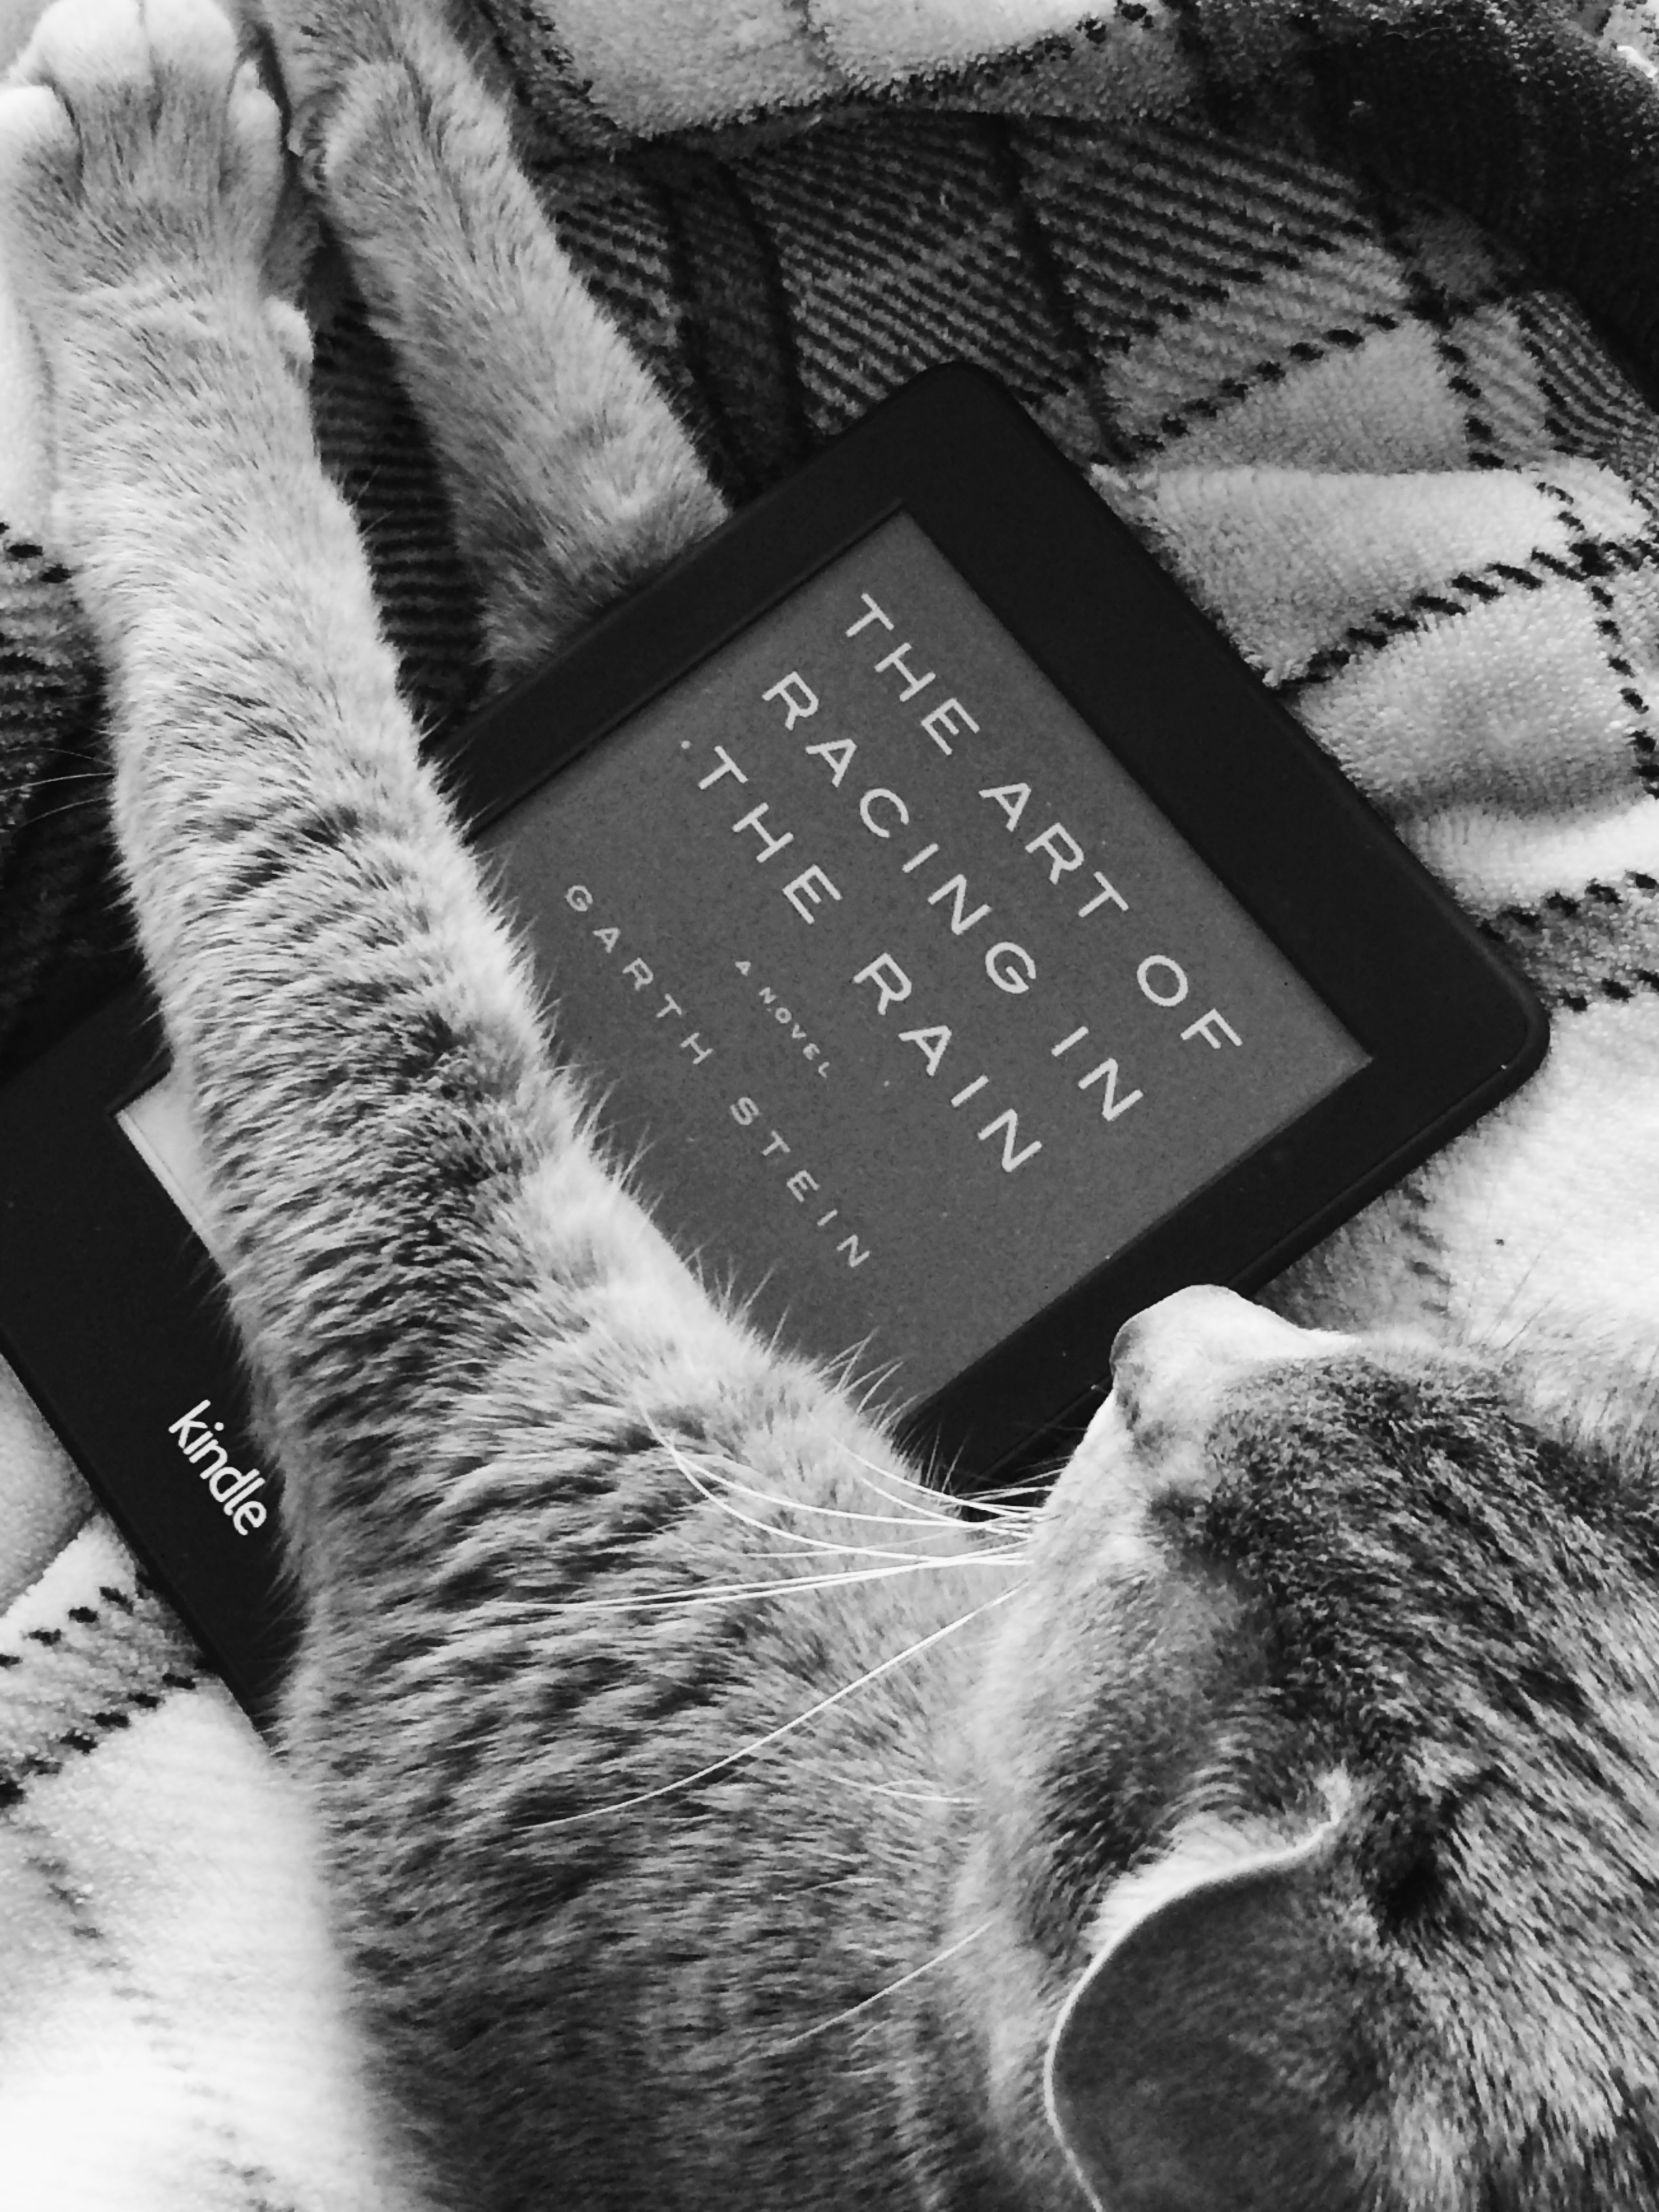 a black and white photo of Ollie the cat snuggling with a Kindle version of Garth Stein's book The Art of Racing in the Rain